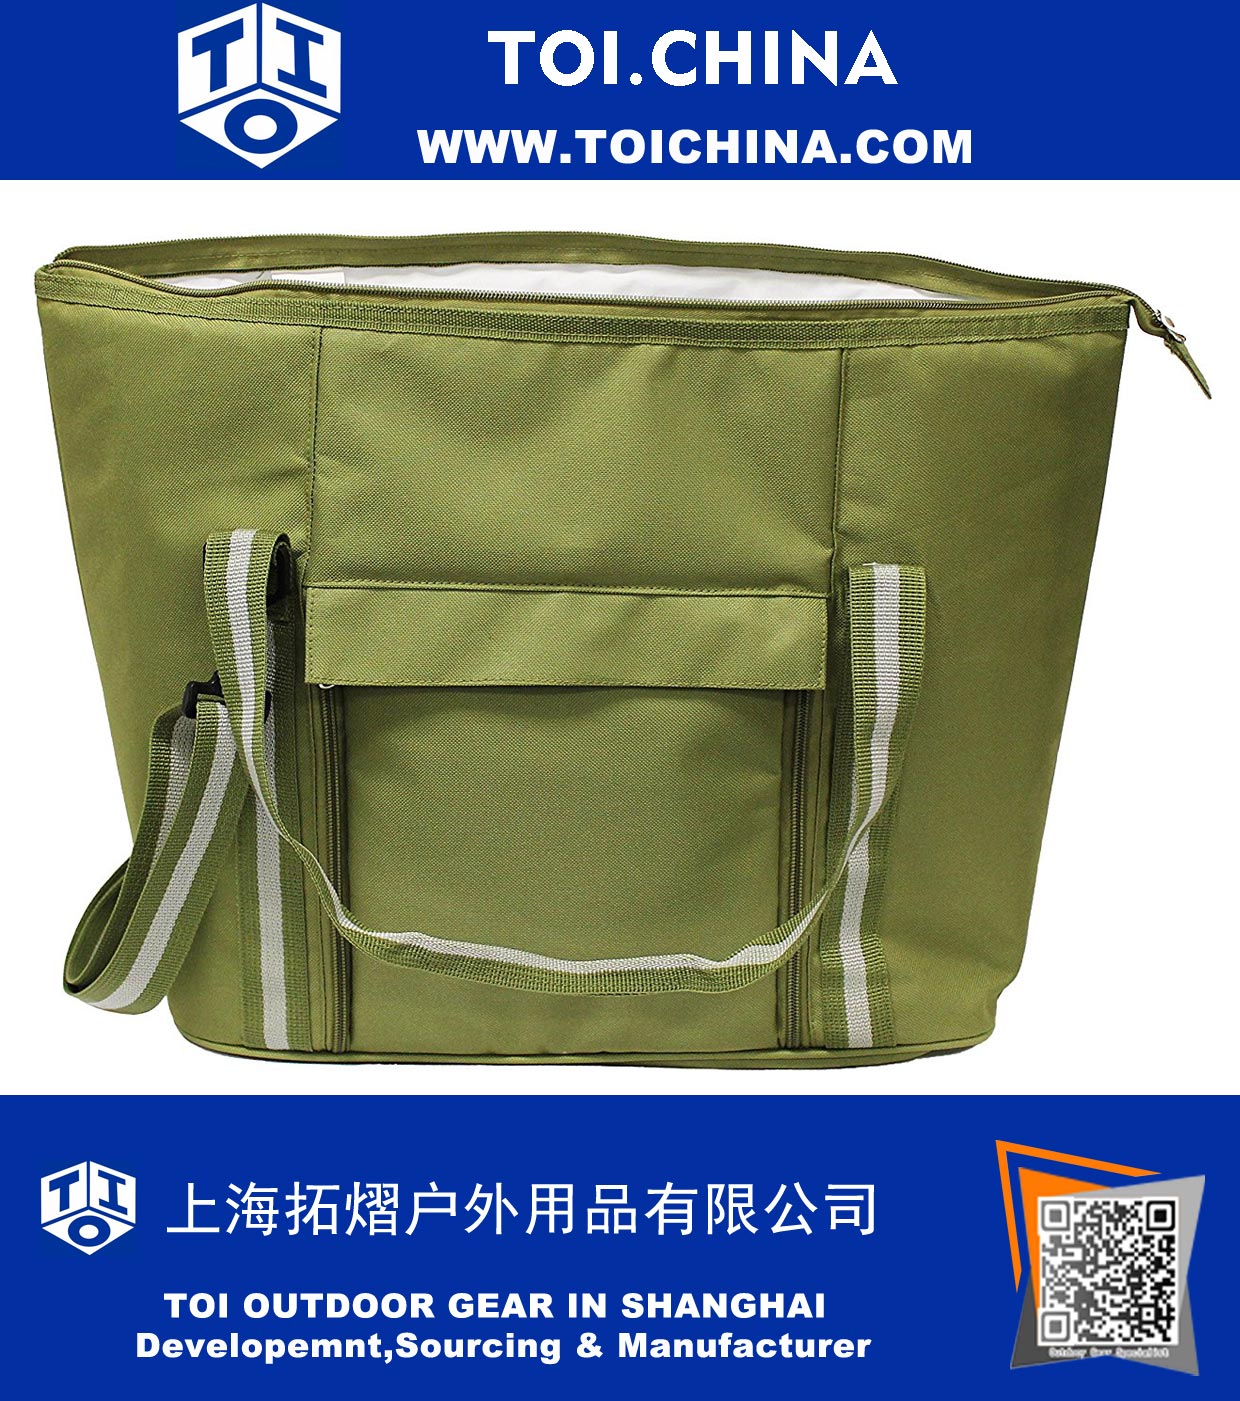 Large Insulated Picnic Bag